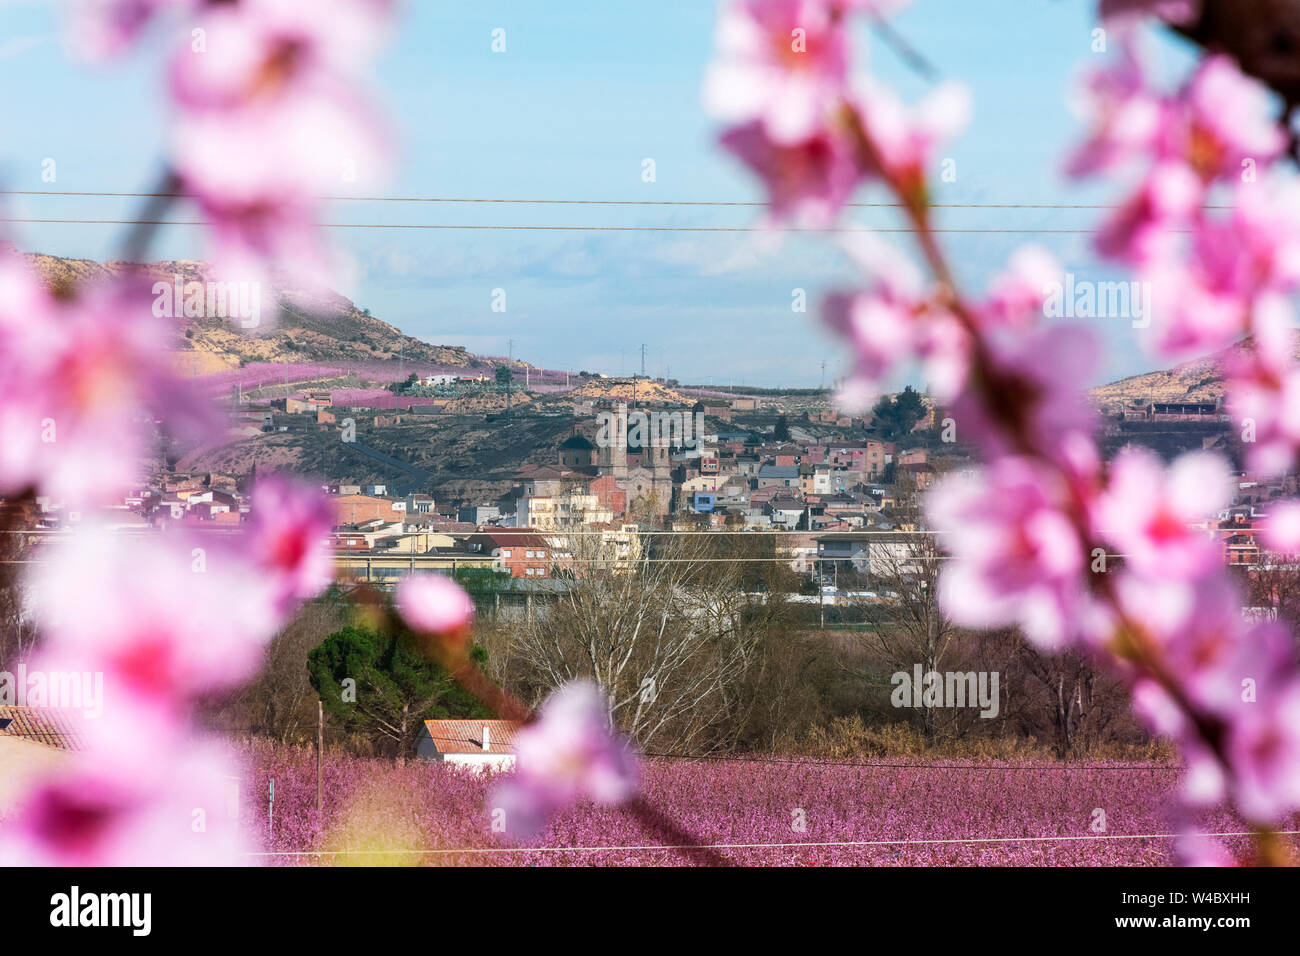 Aitona landscape, the village on the background and peach trees in bloom on the foreground. Full of delicate pink flowers at sunrise. Peaceful atmosph Stock Photo